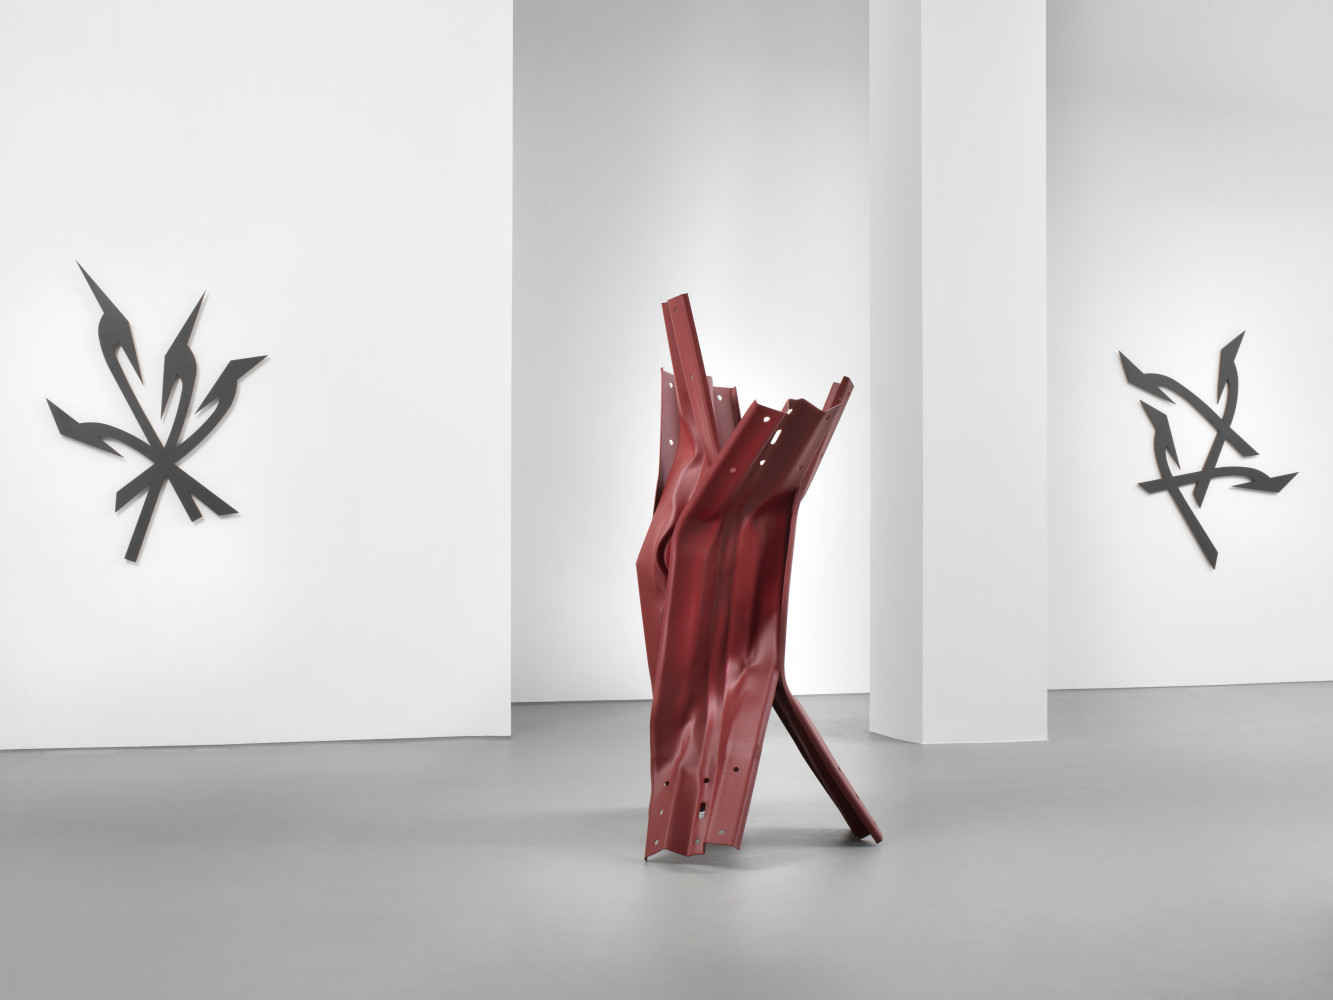 Bettina Pousttchi, ‘Directions’, Installation view, 2021